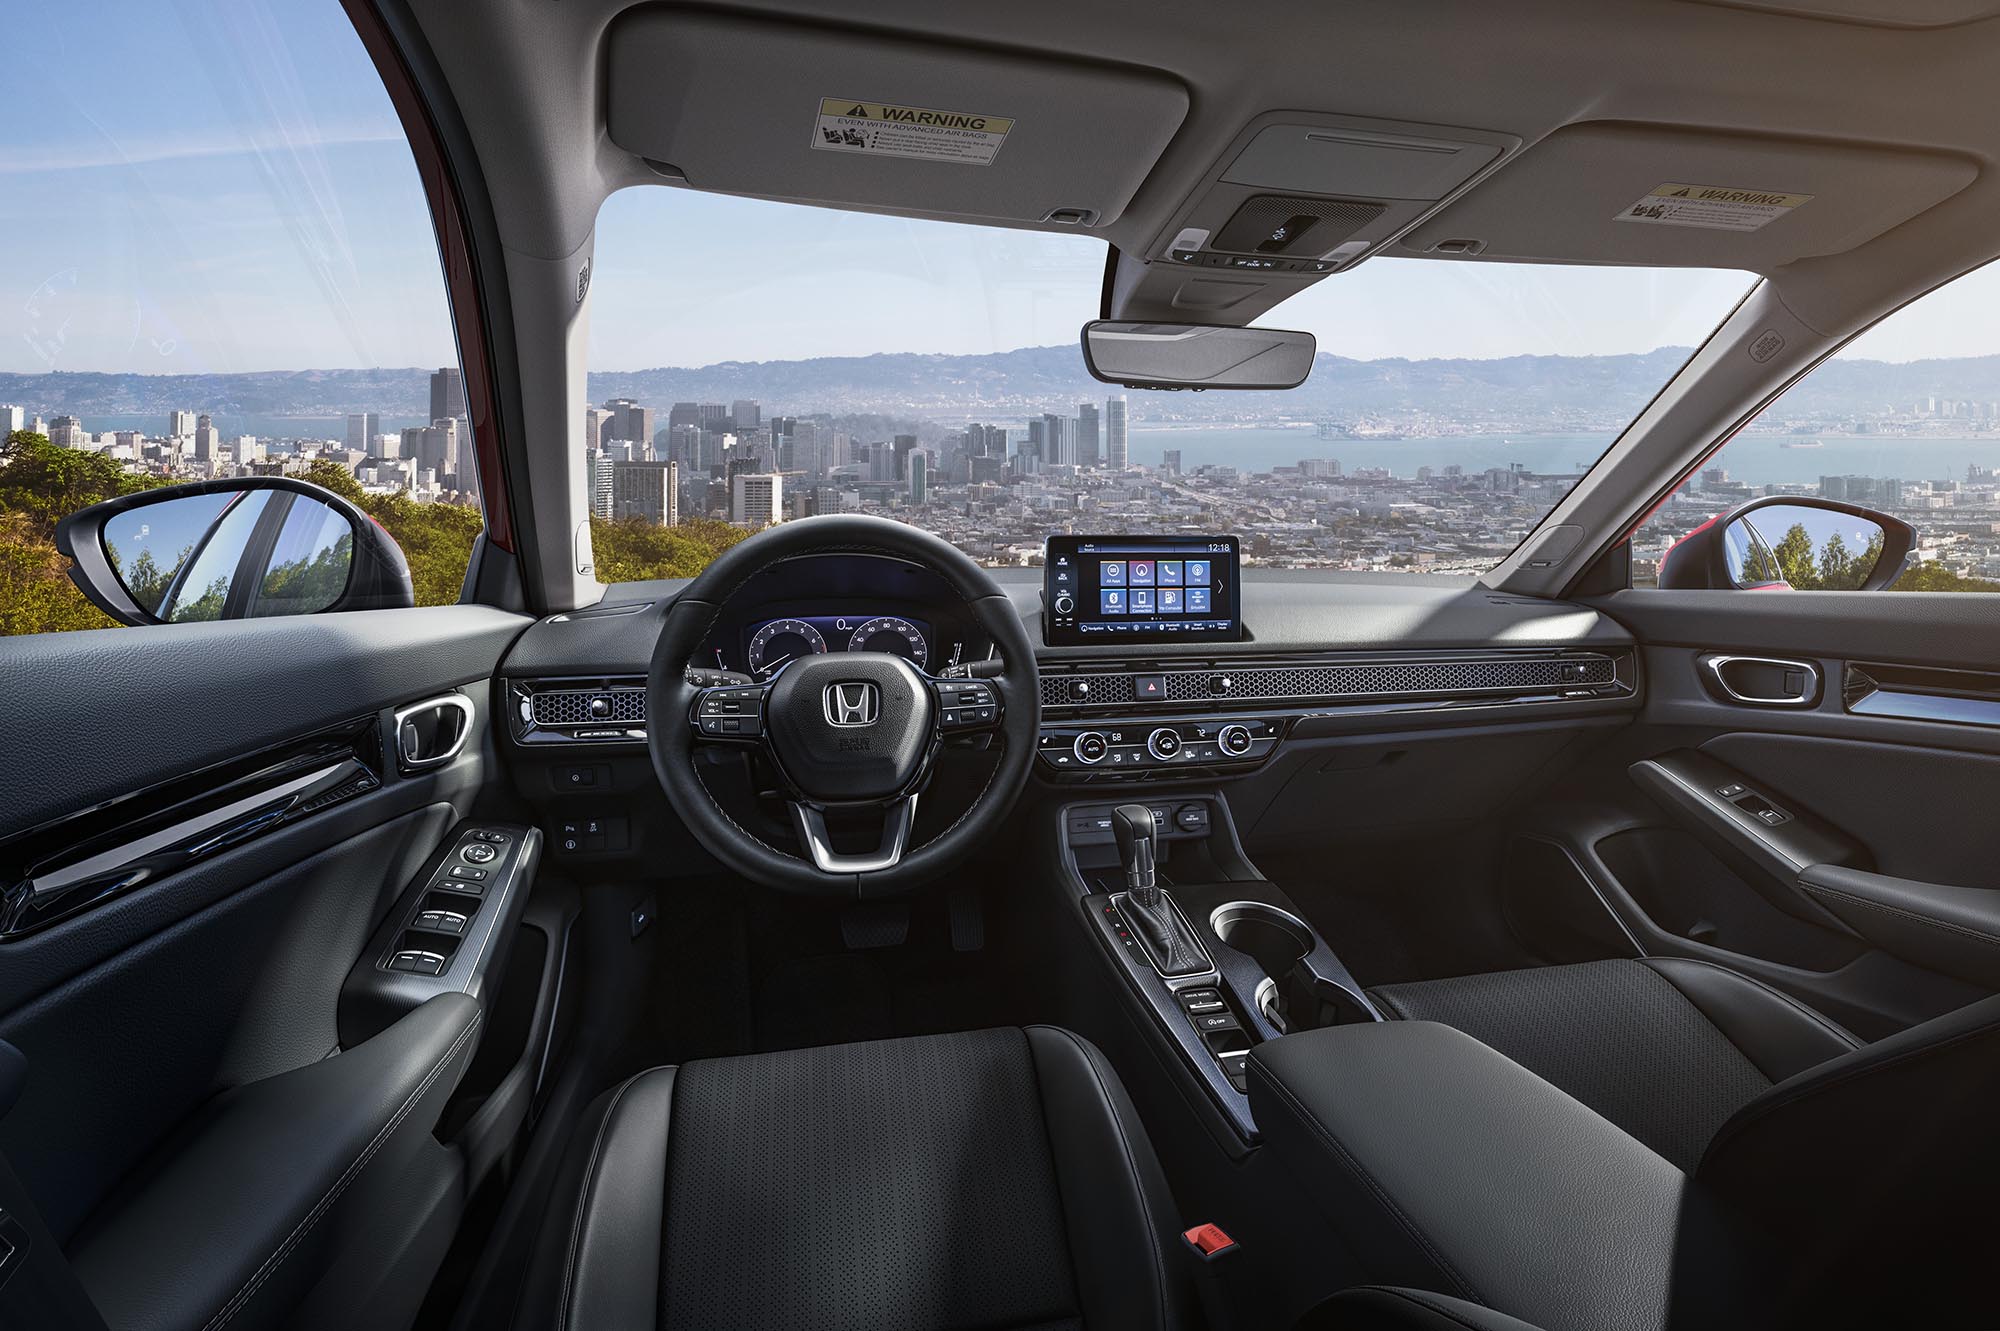 Front seats of current-generation Honda Civic with view out windshield of cityscape